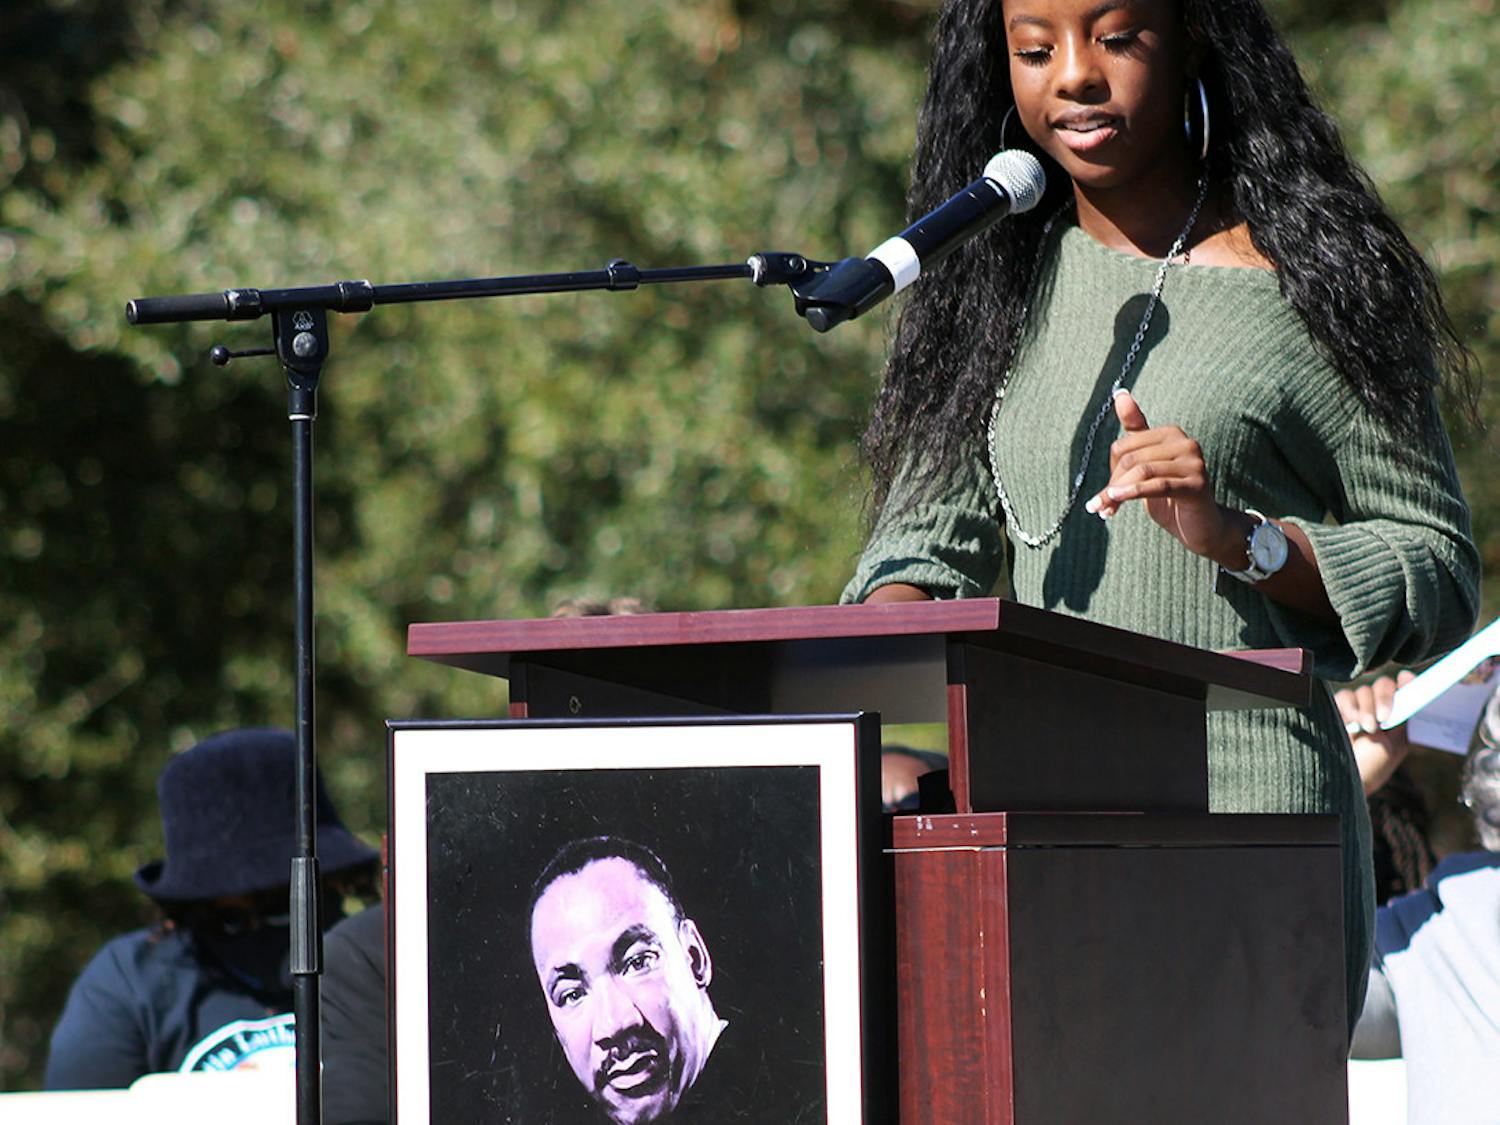 Taylor Hill-Miles, this year’s winner of the Edna M. Hart Keeper of the Dream Award, gives a keynote speech at Citizens Field on Martin Luther King Jr. Day. She talked about the importance of demanding justice for the Black community.